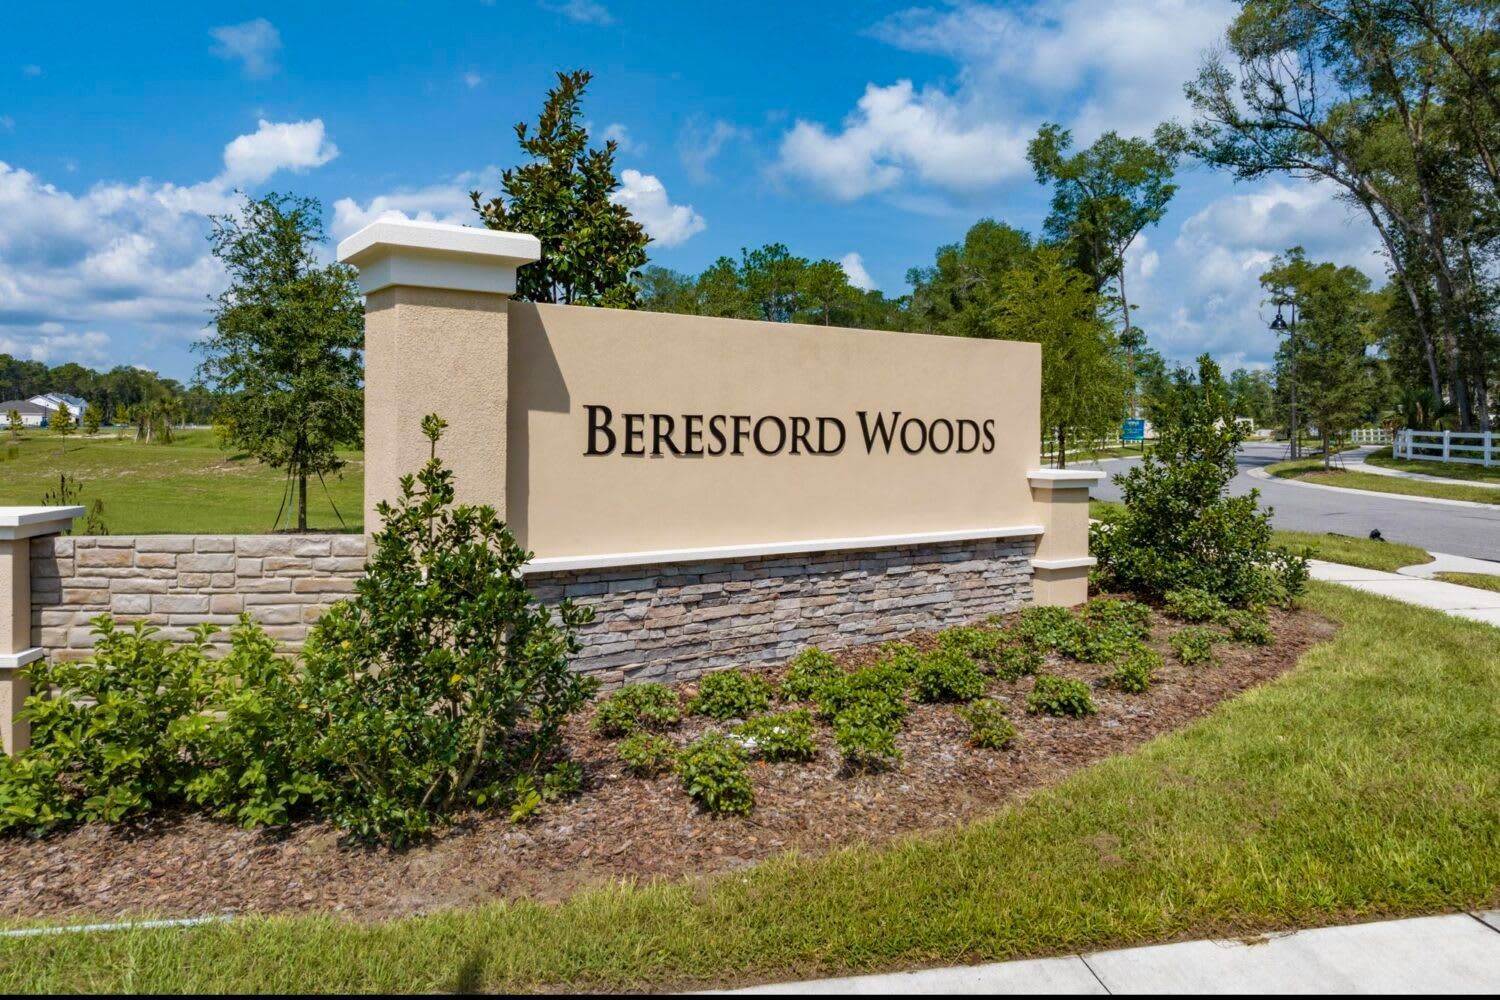 4. Beresford Woods building at 1107 Happy Forest Loop, Deland, FL 32720